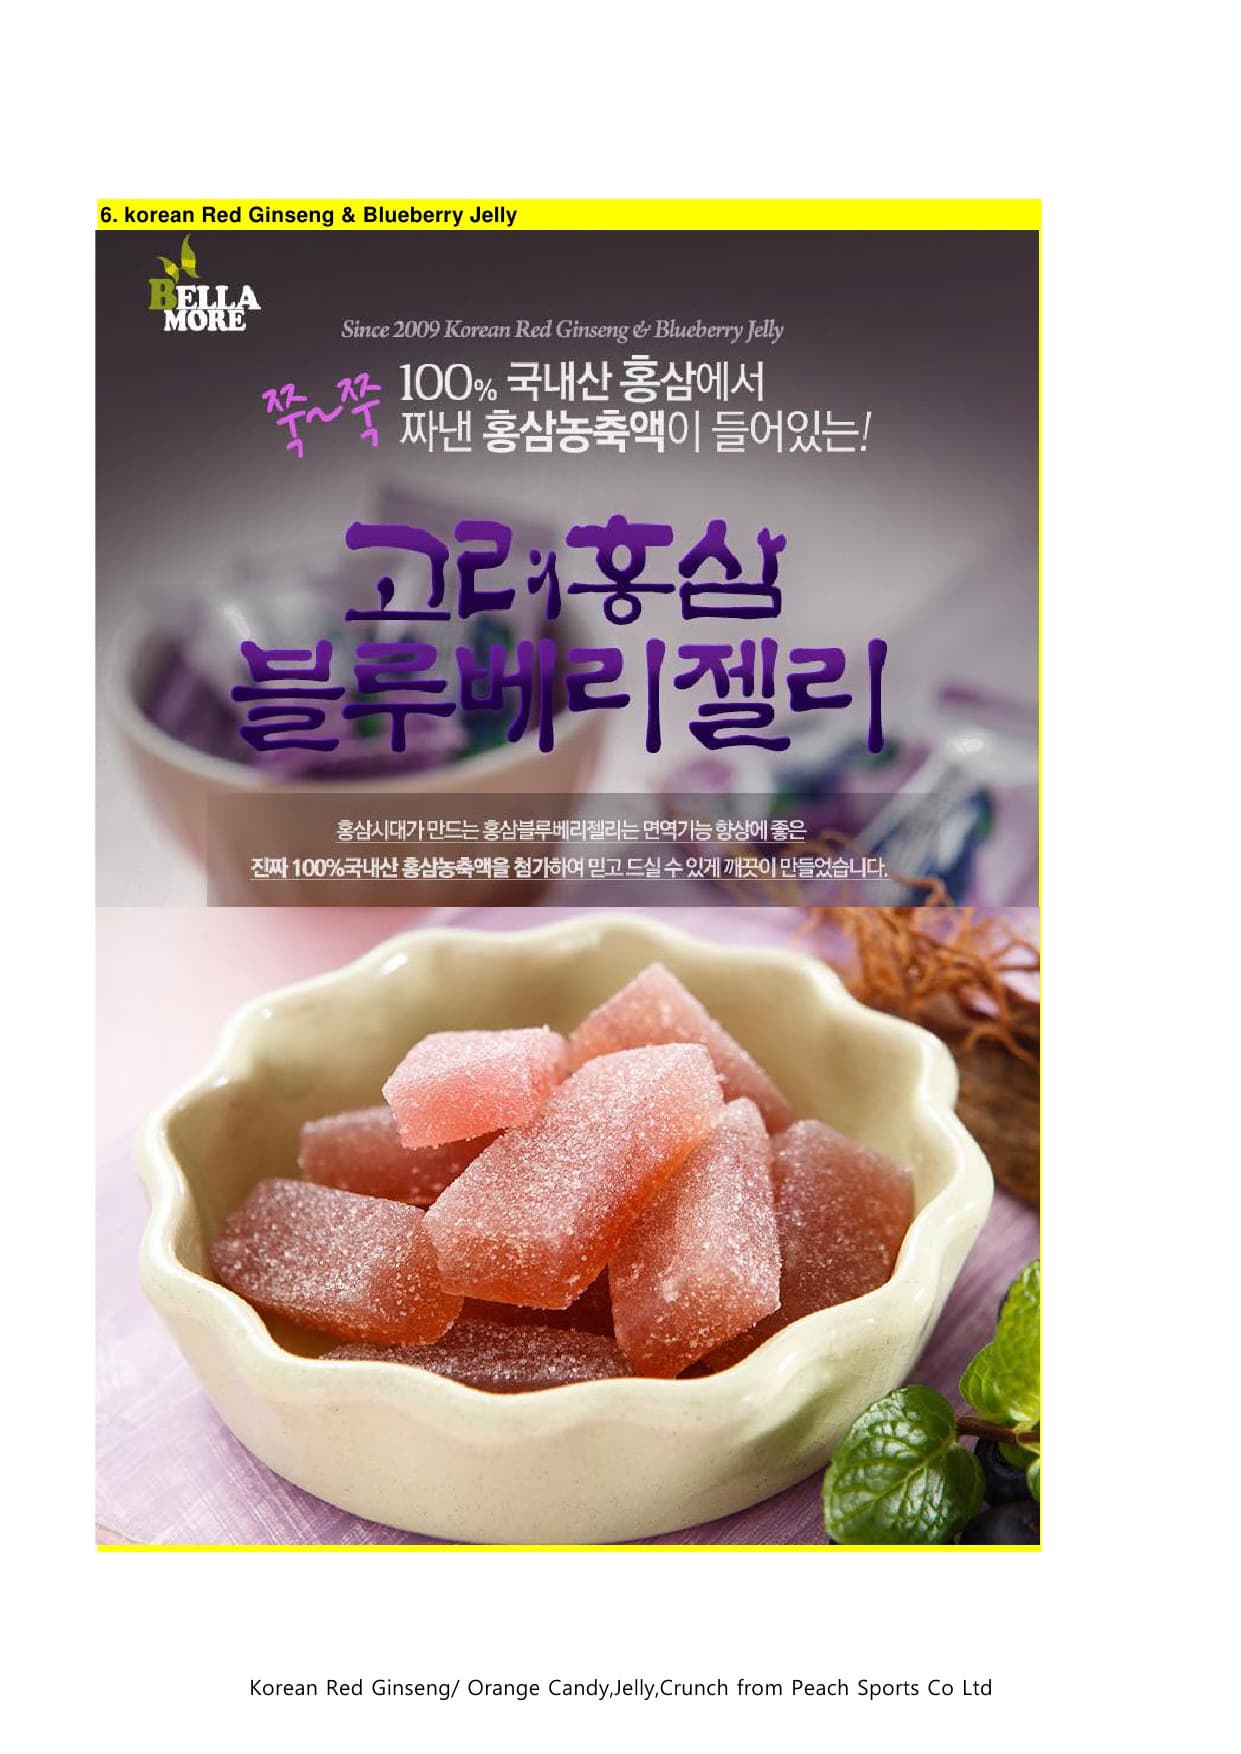 Korean Red Ginseng Blueberry Jelly